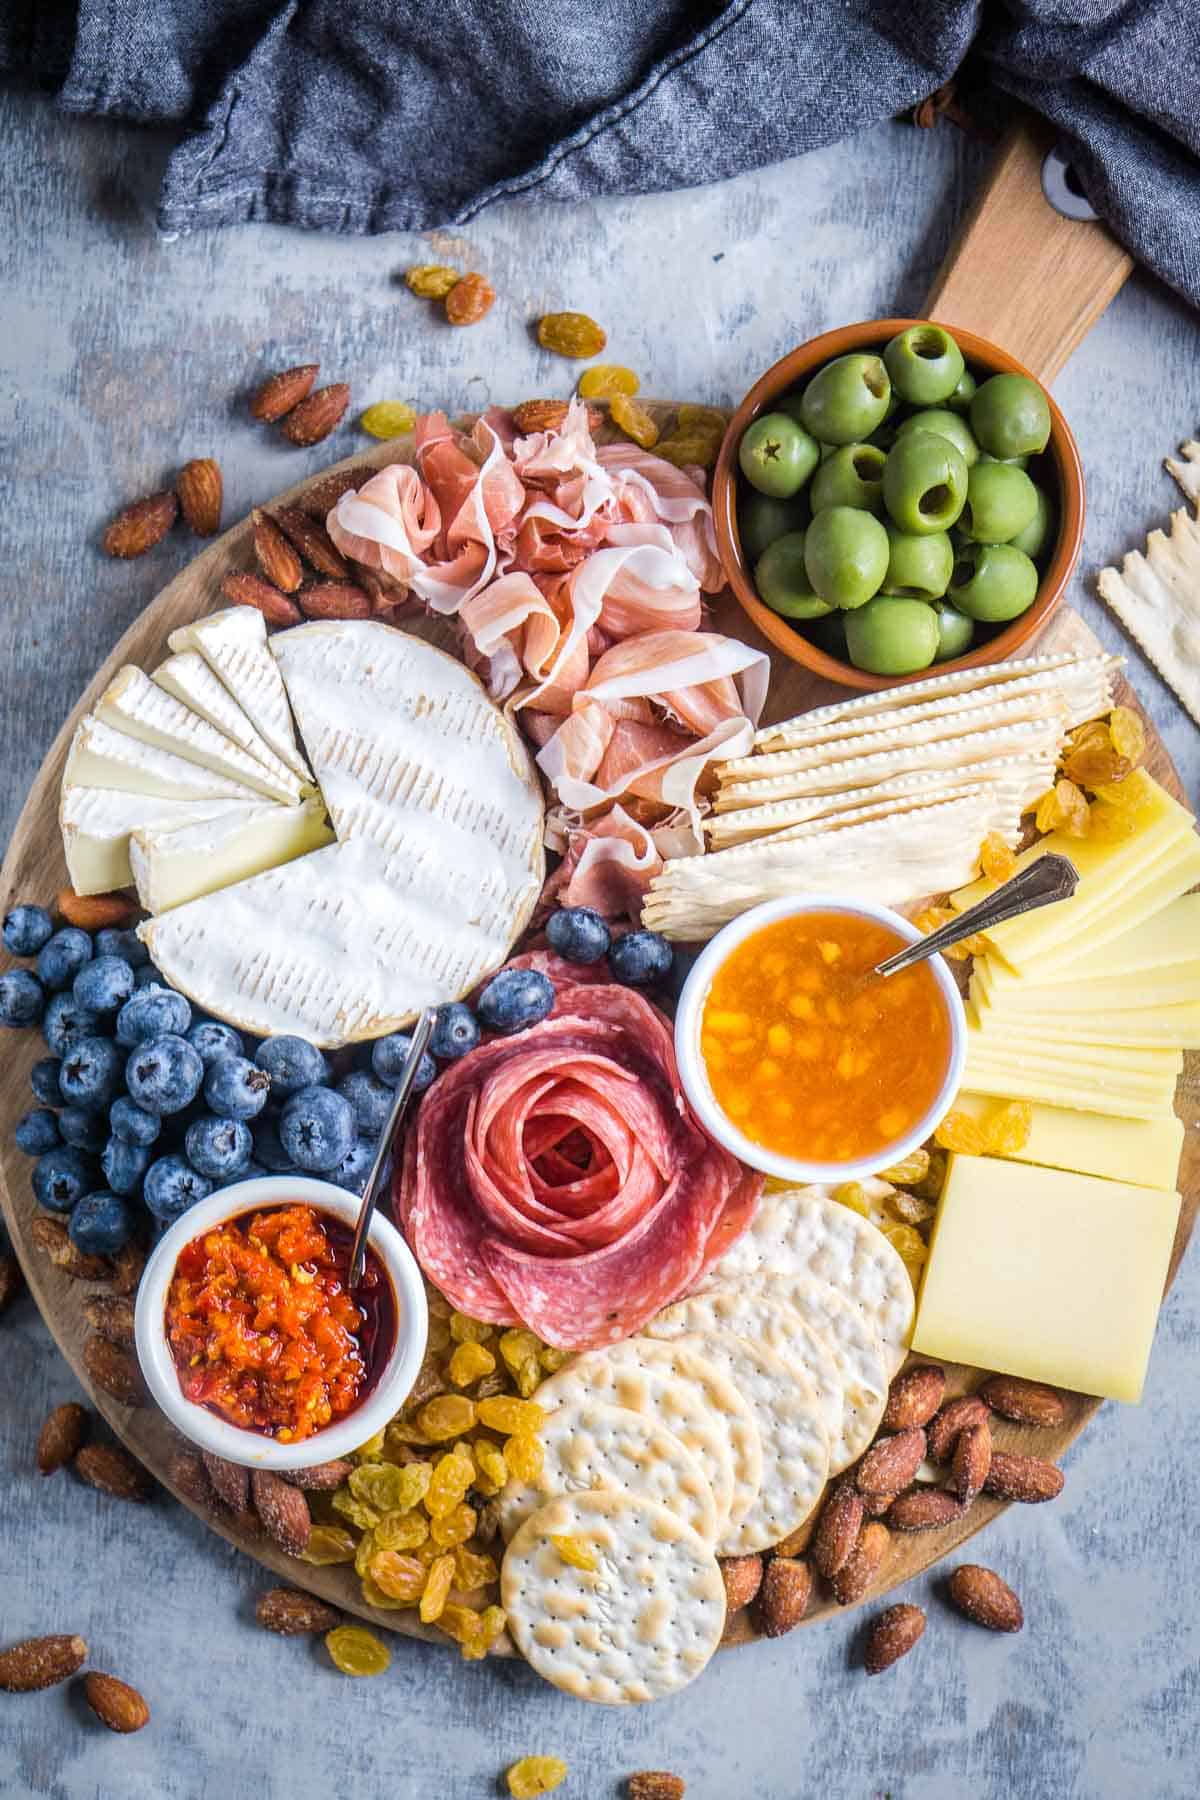 round charcuterie board with sliced meats, cheeses, fruit, nuts, olives, and spreads